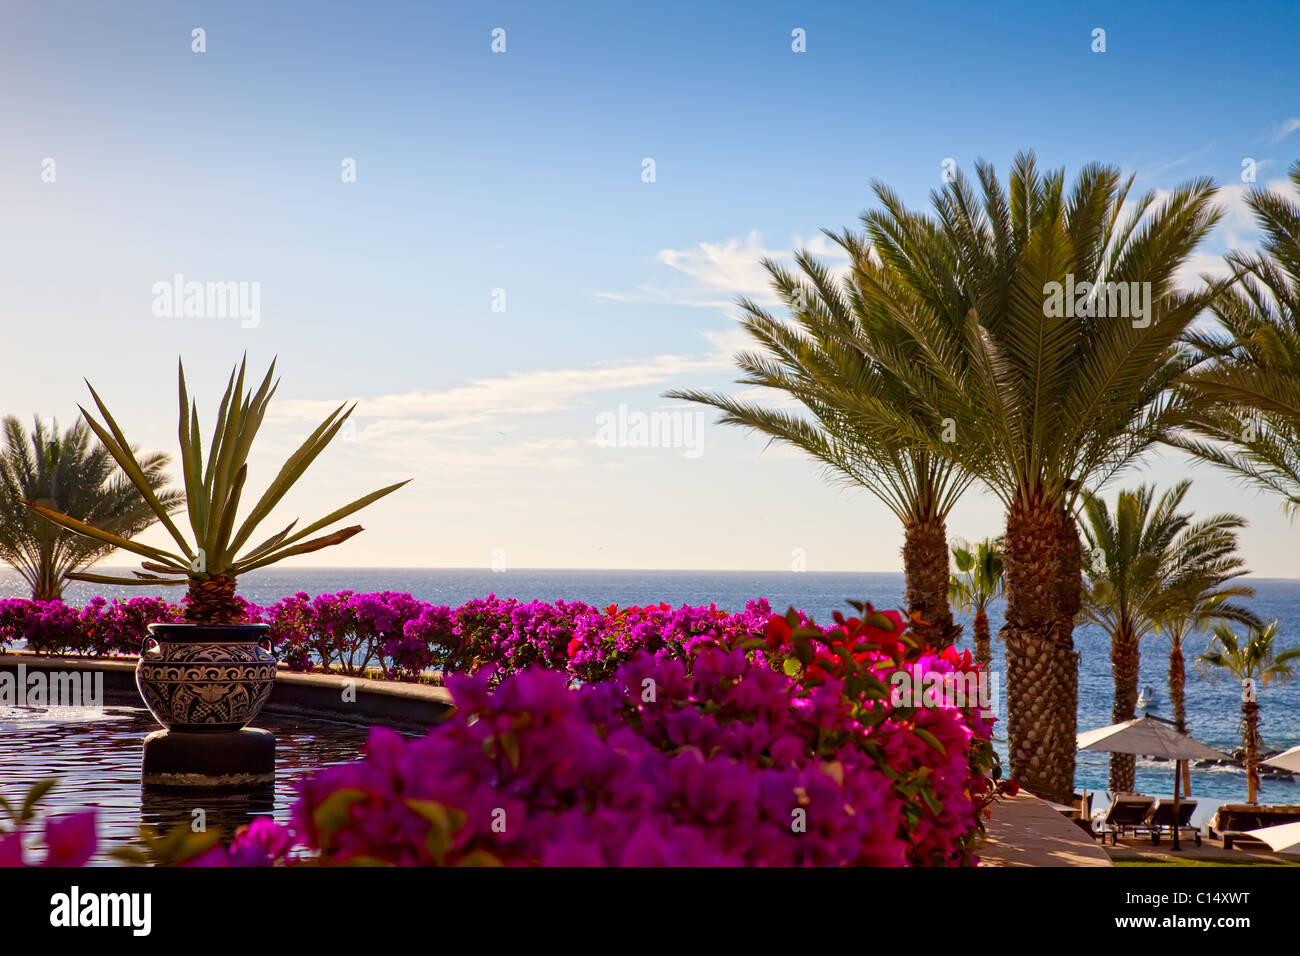 View of Sea of Cortez in Cabo San Lucas, Mexico Stock Photo